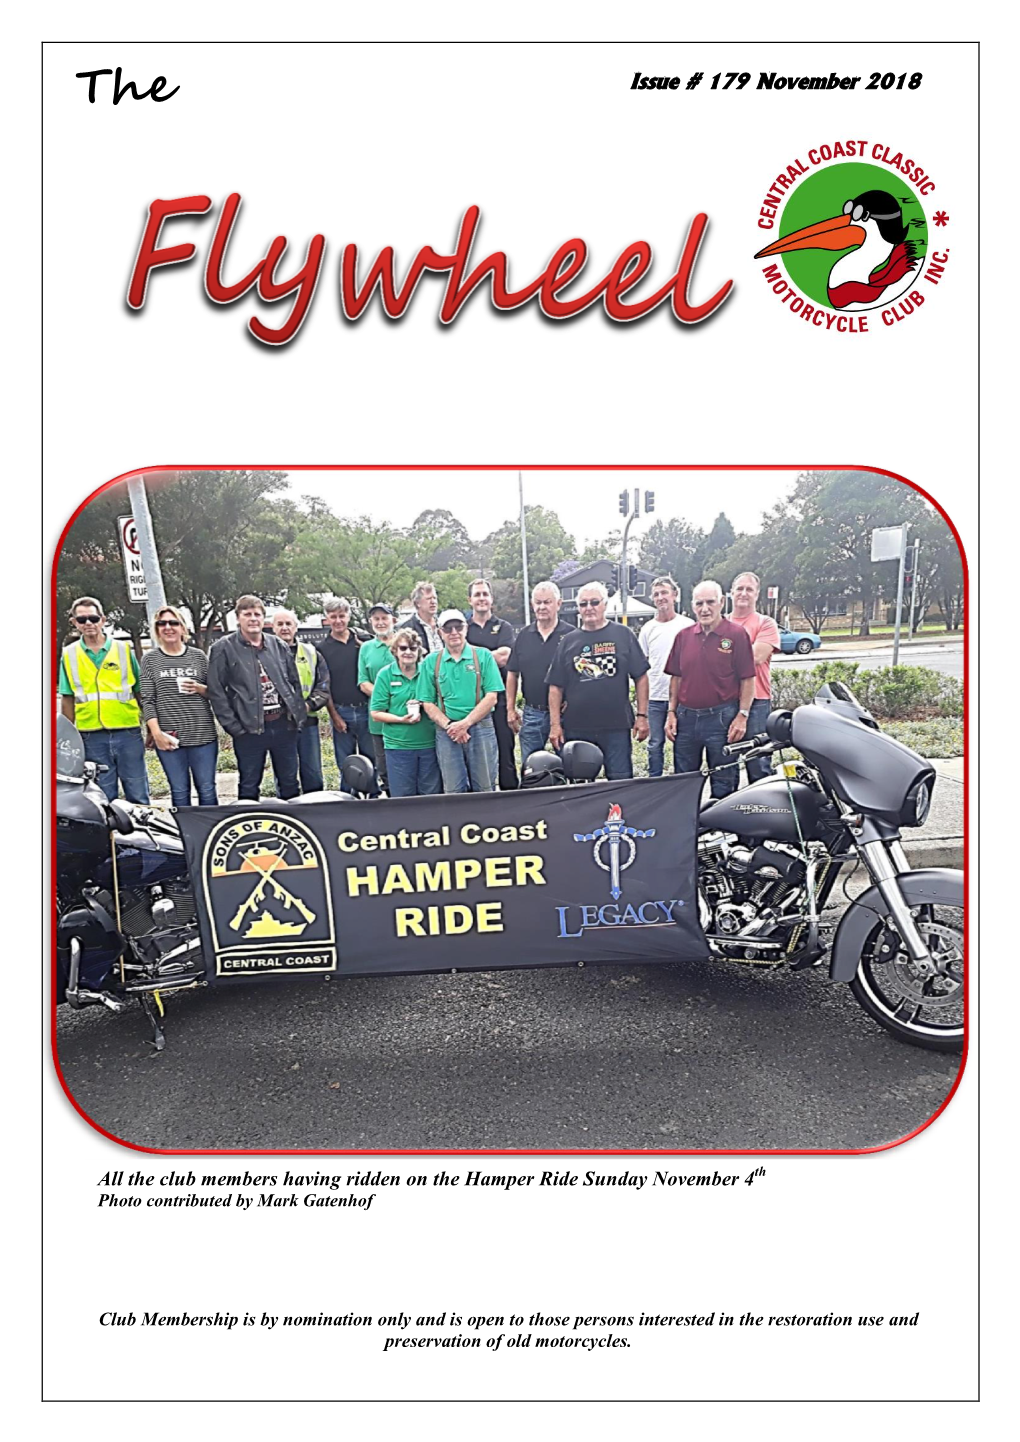 Issue # 179 November 2018 All the Club Members Having Ridden on The